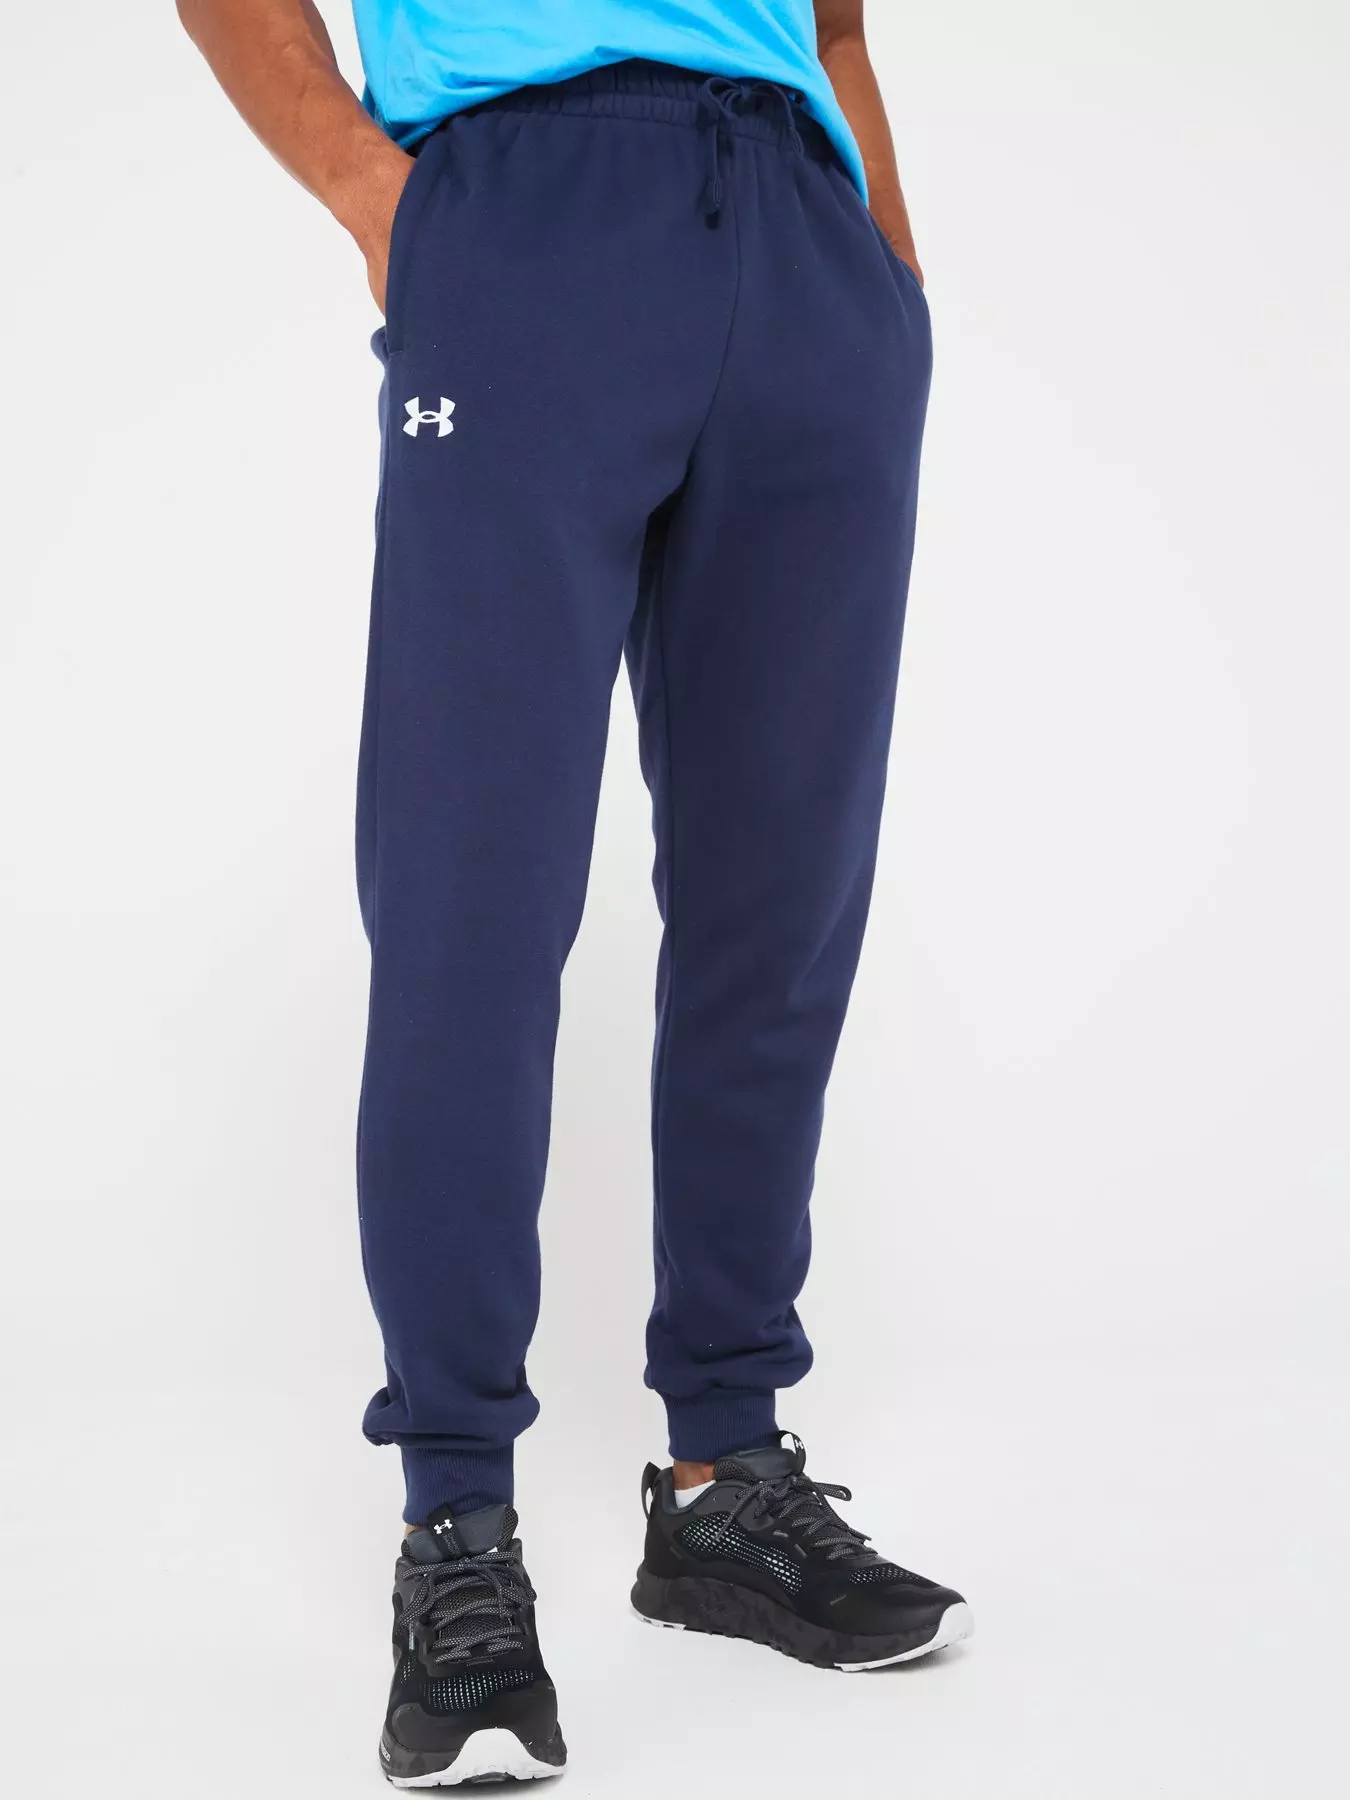  Under Armour - Womens W Freedom Rival Jogger Pants